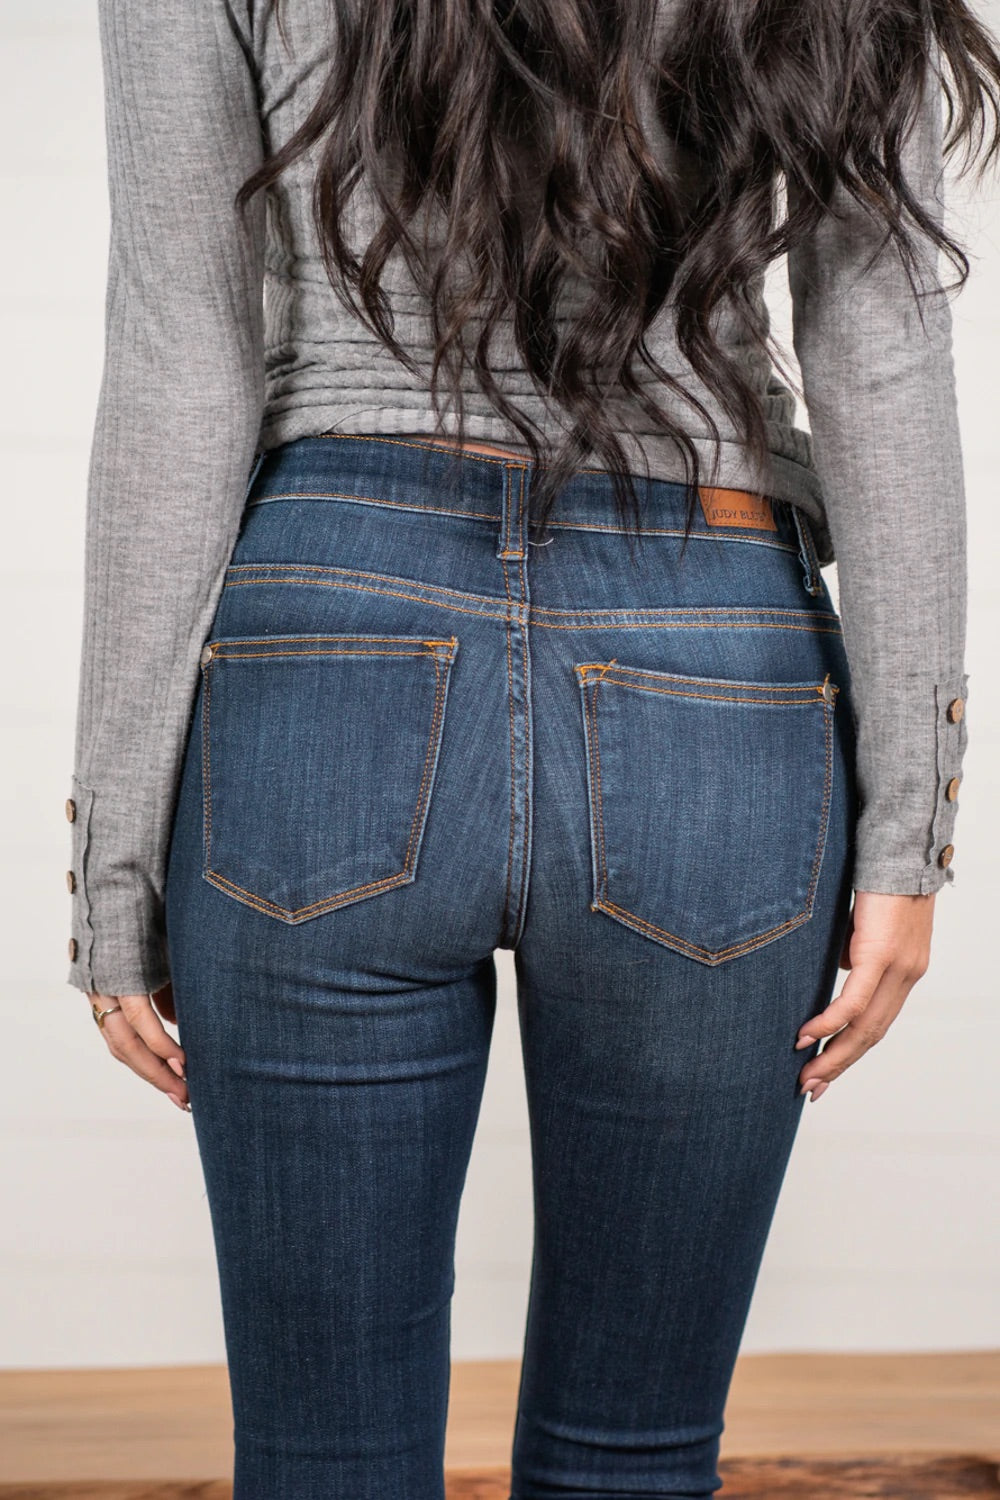 Stretchy Skinny Solid Jeans